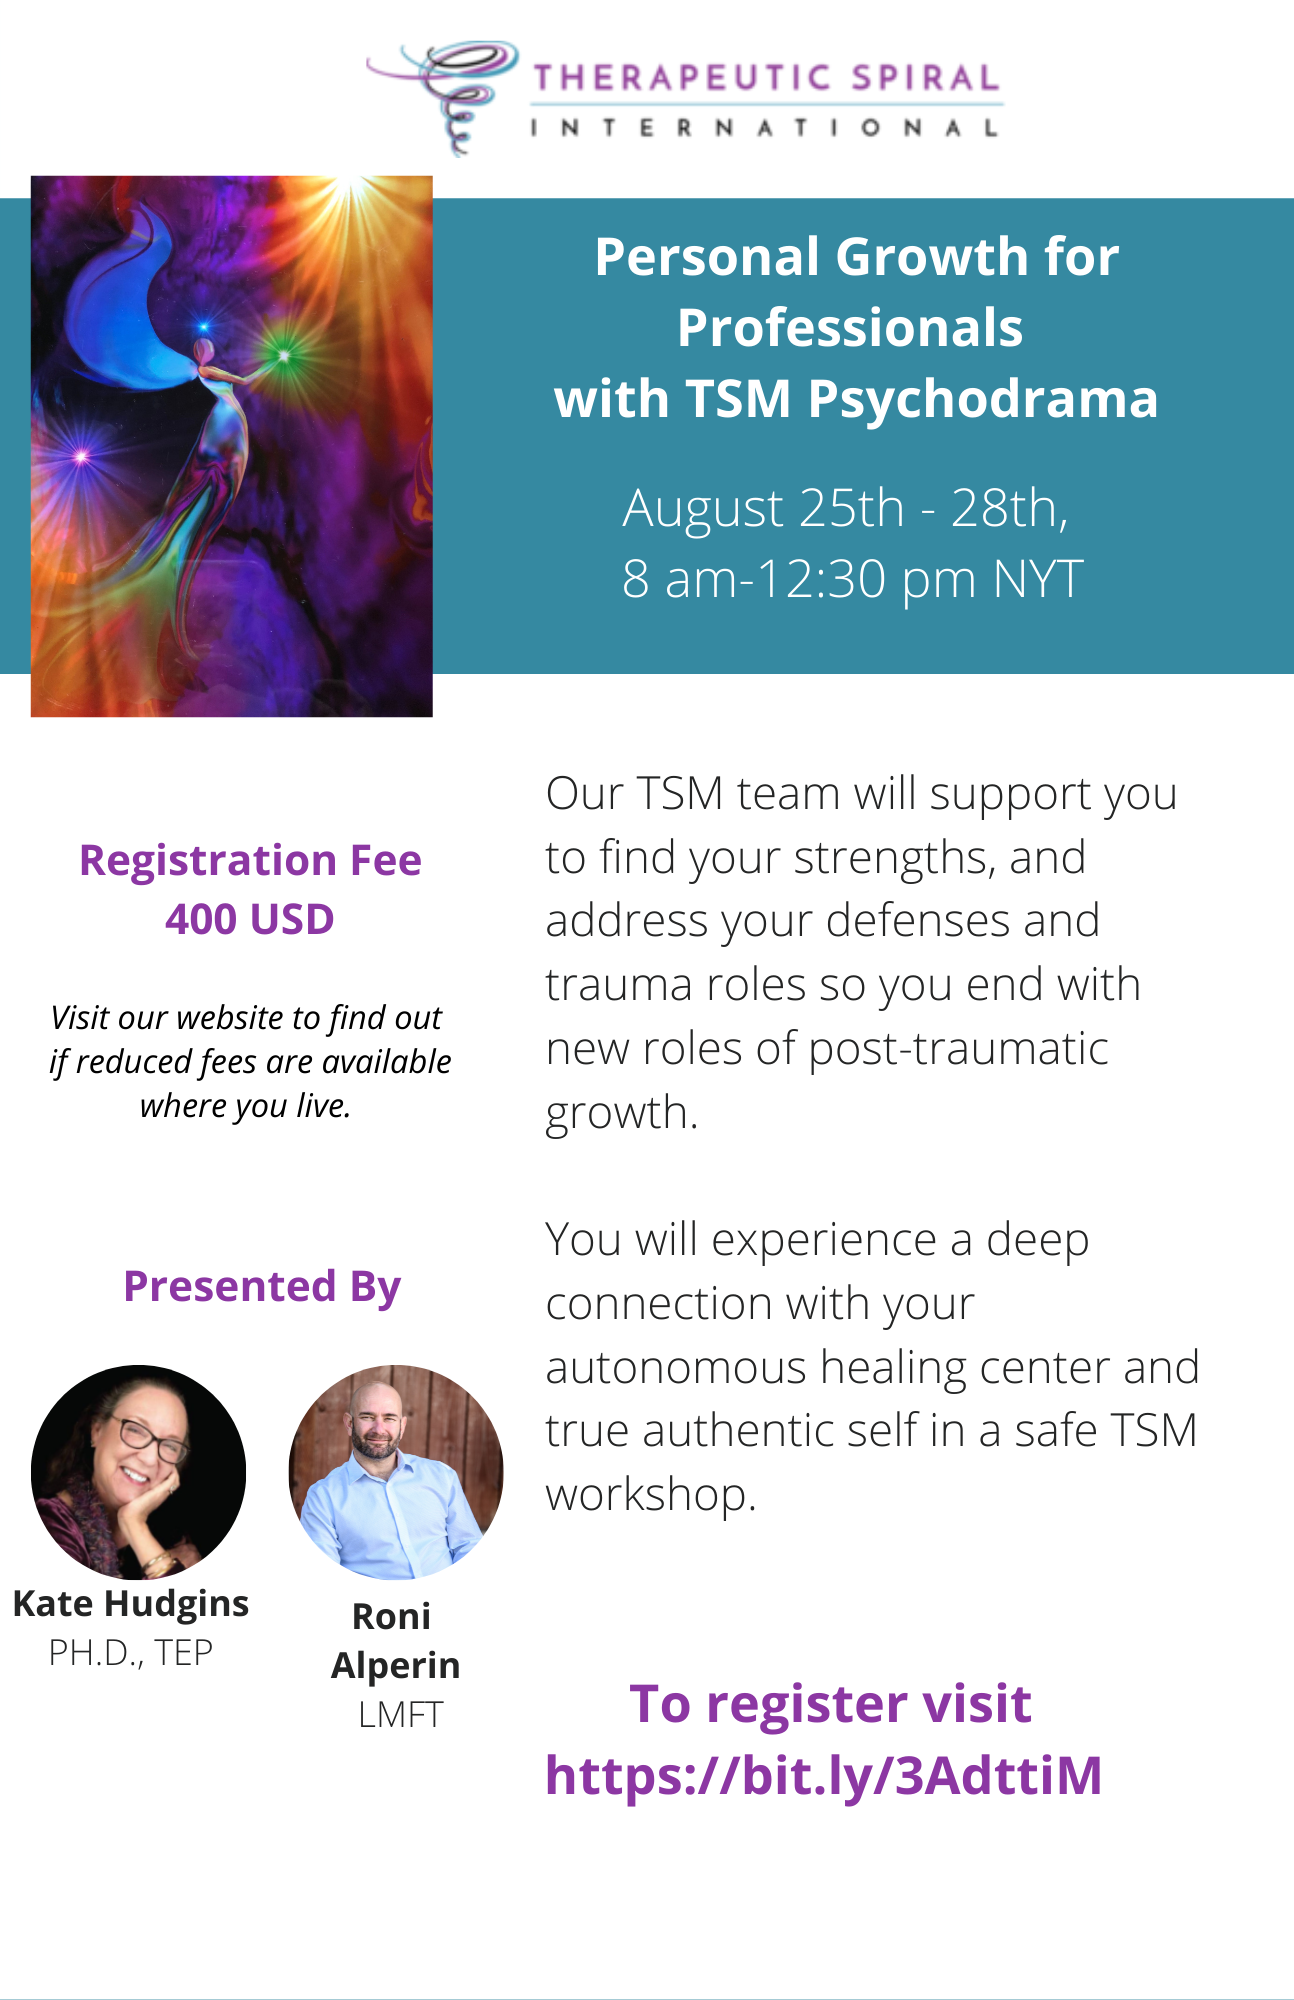 Personal Growth for Professionals with TSM Psychodrama